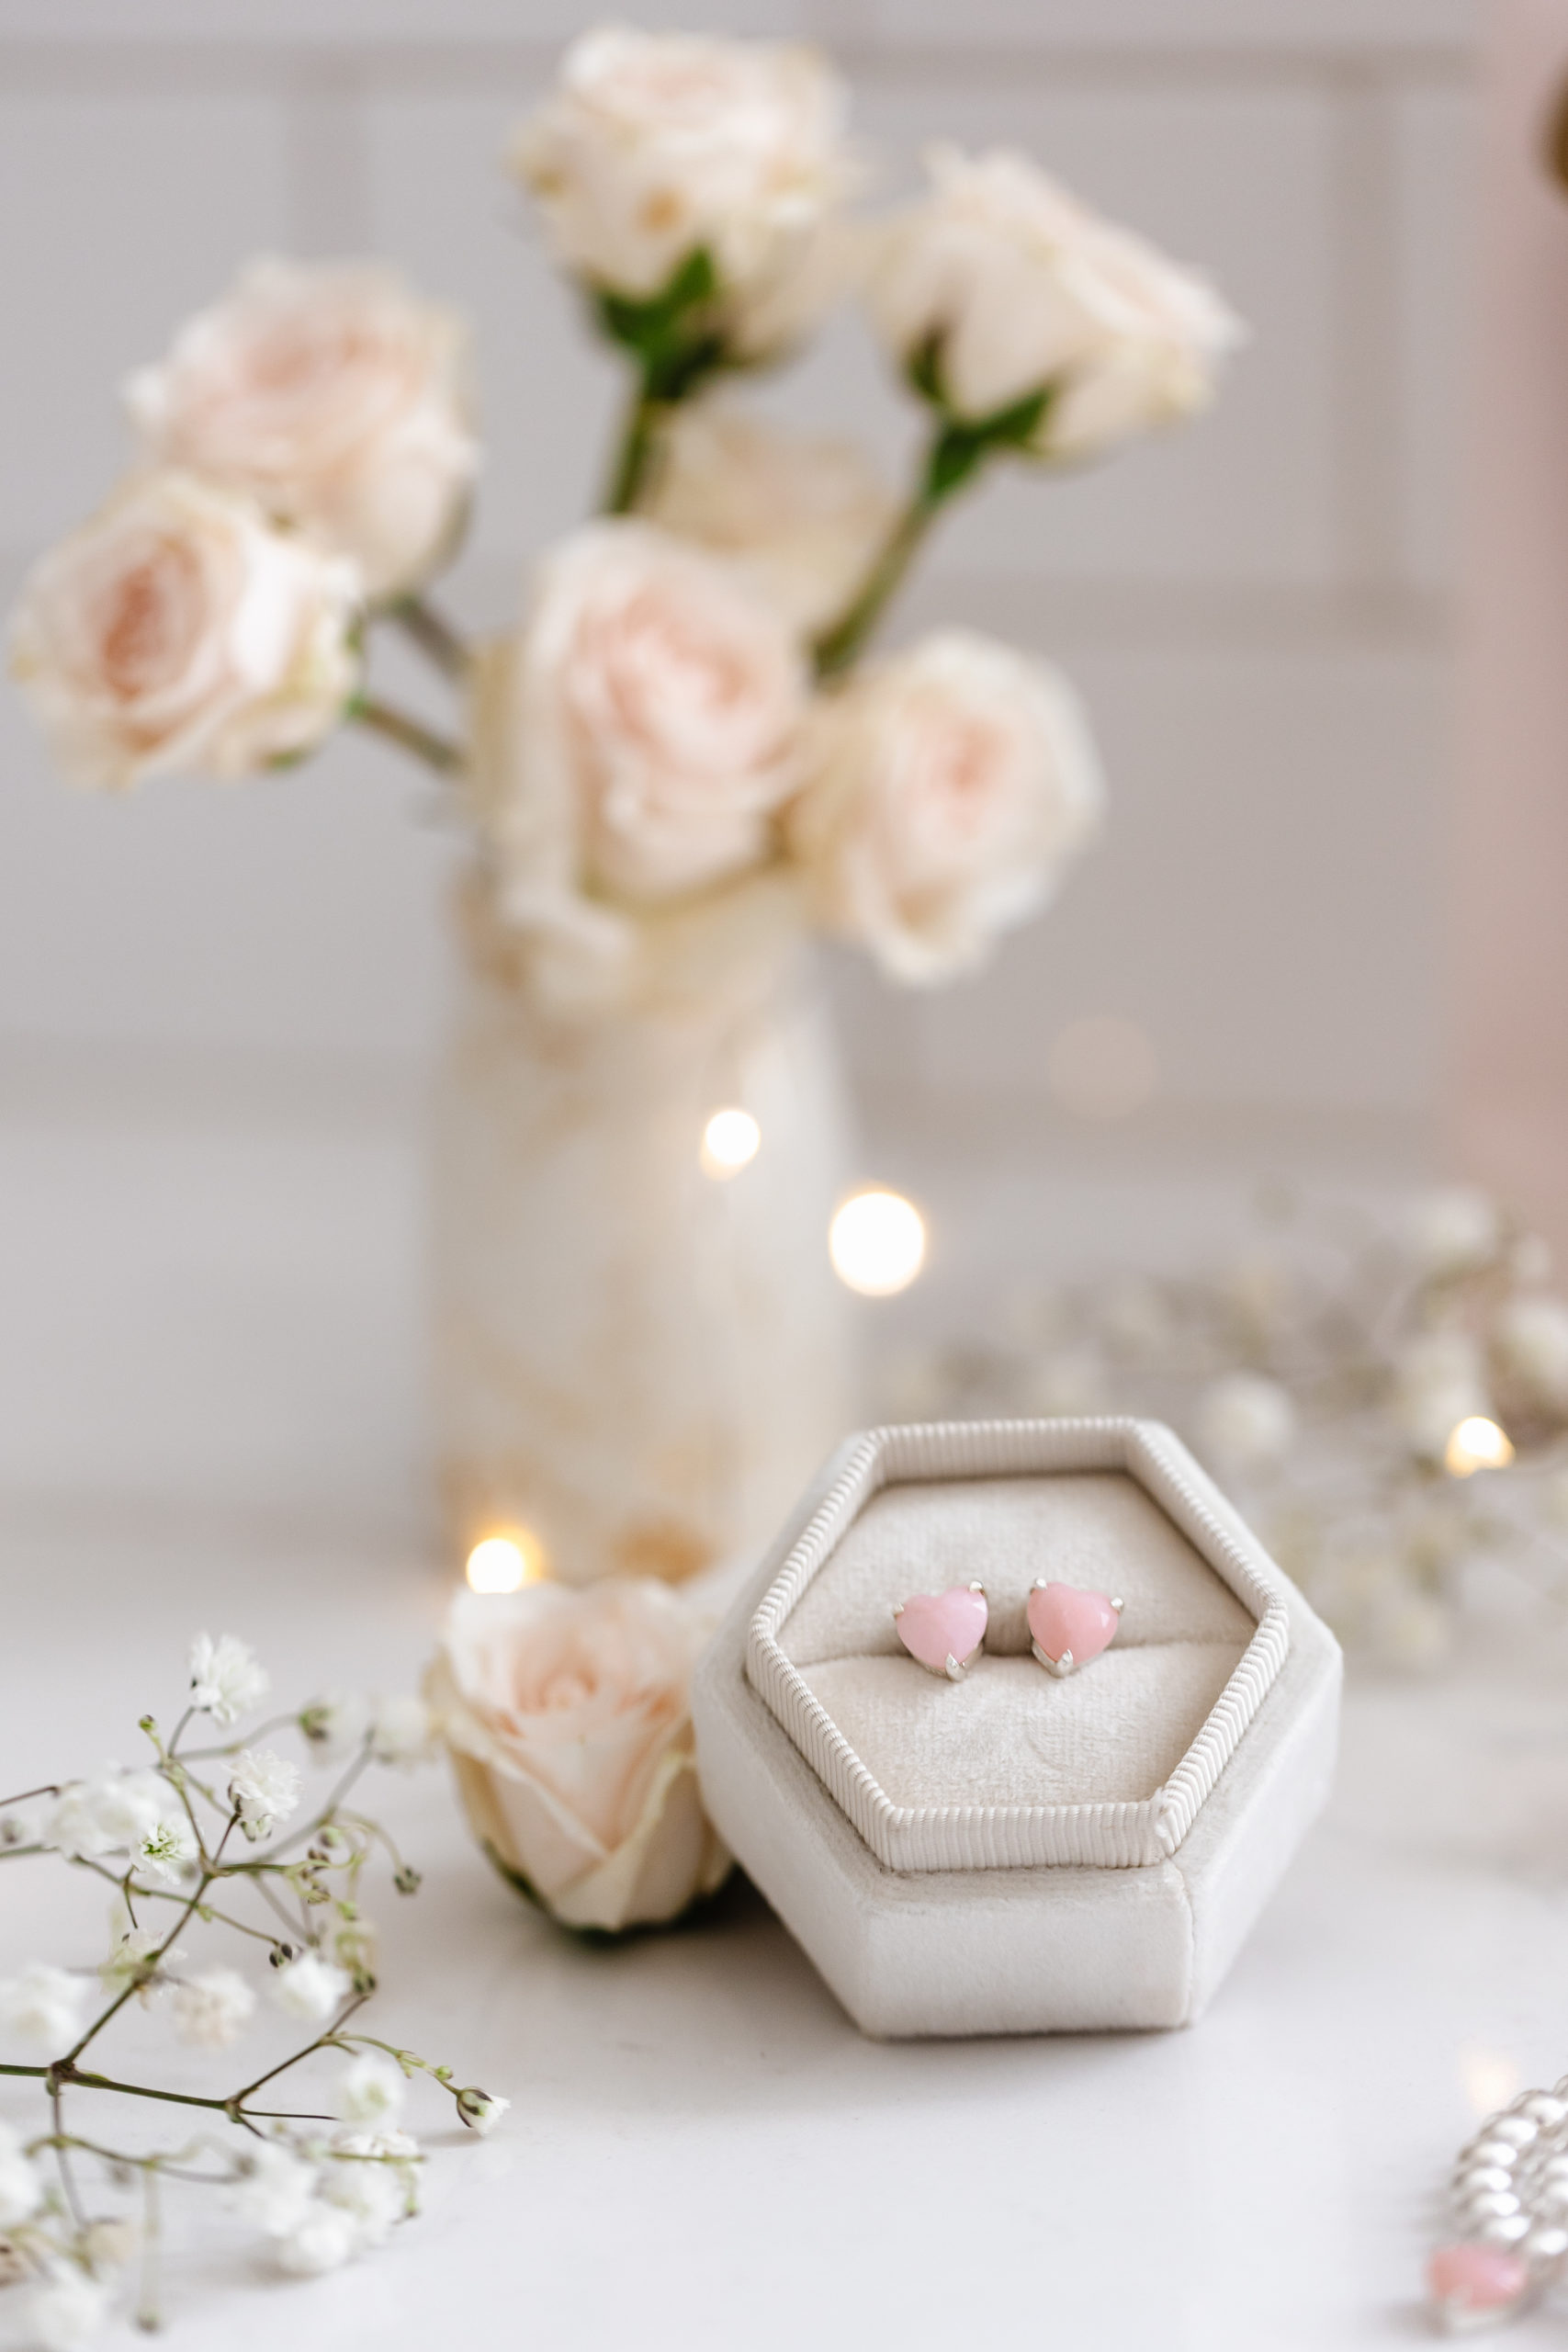 pink heart earrings in a box beside a vase of roses TeamJiX